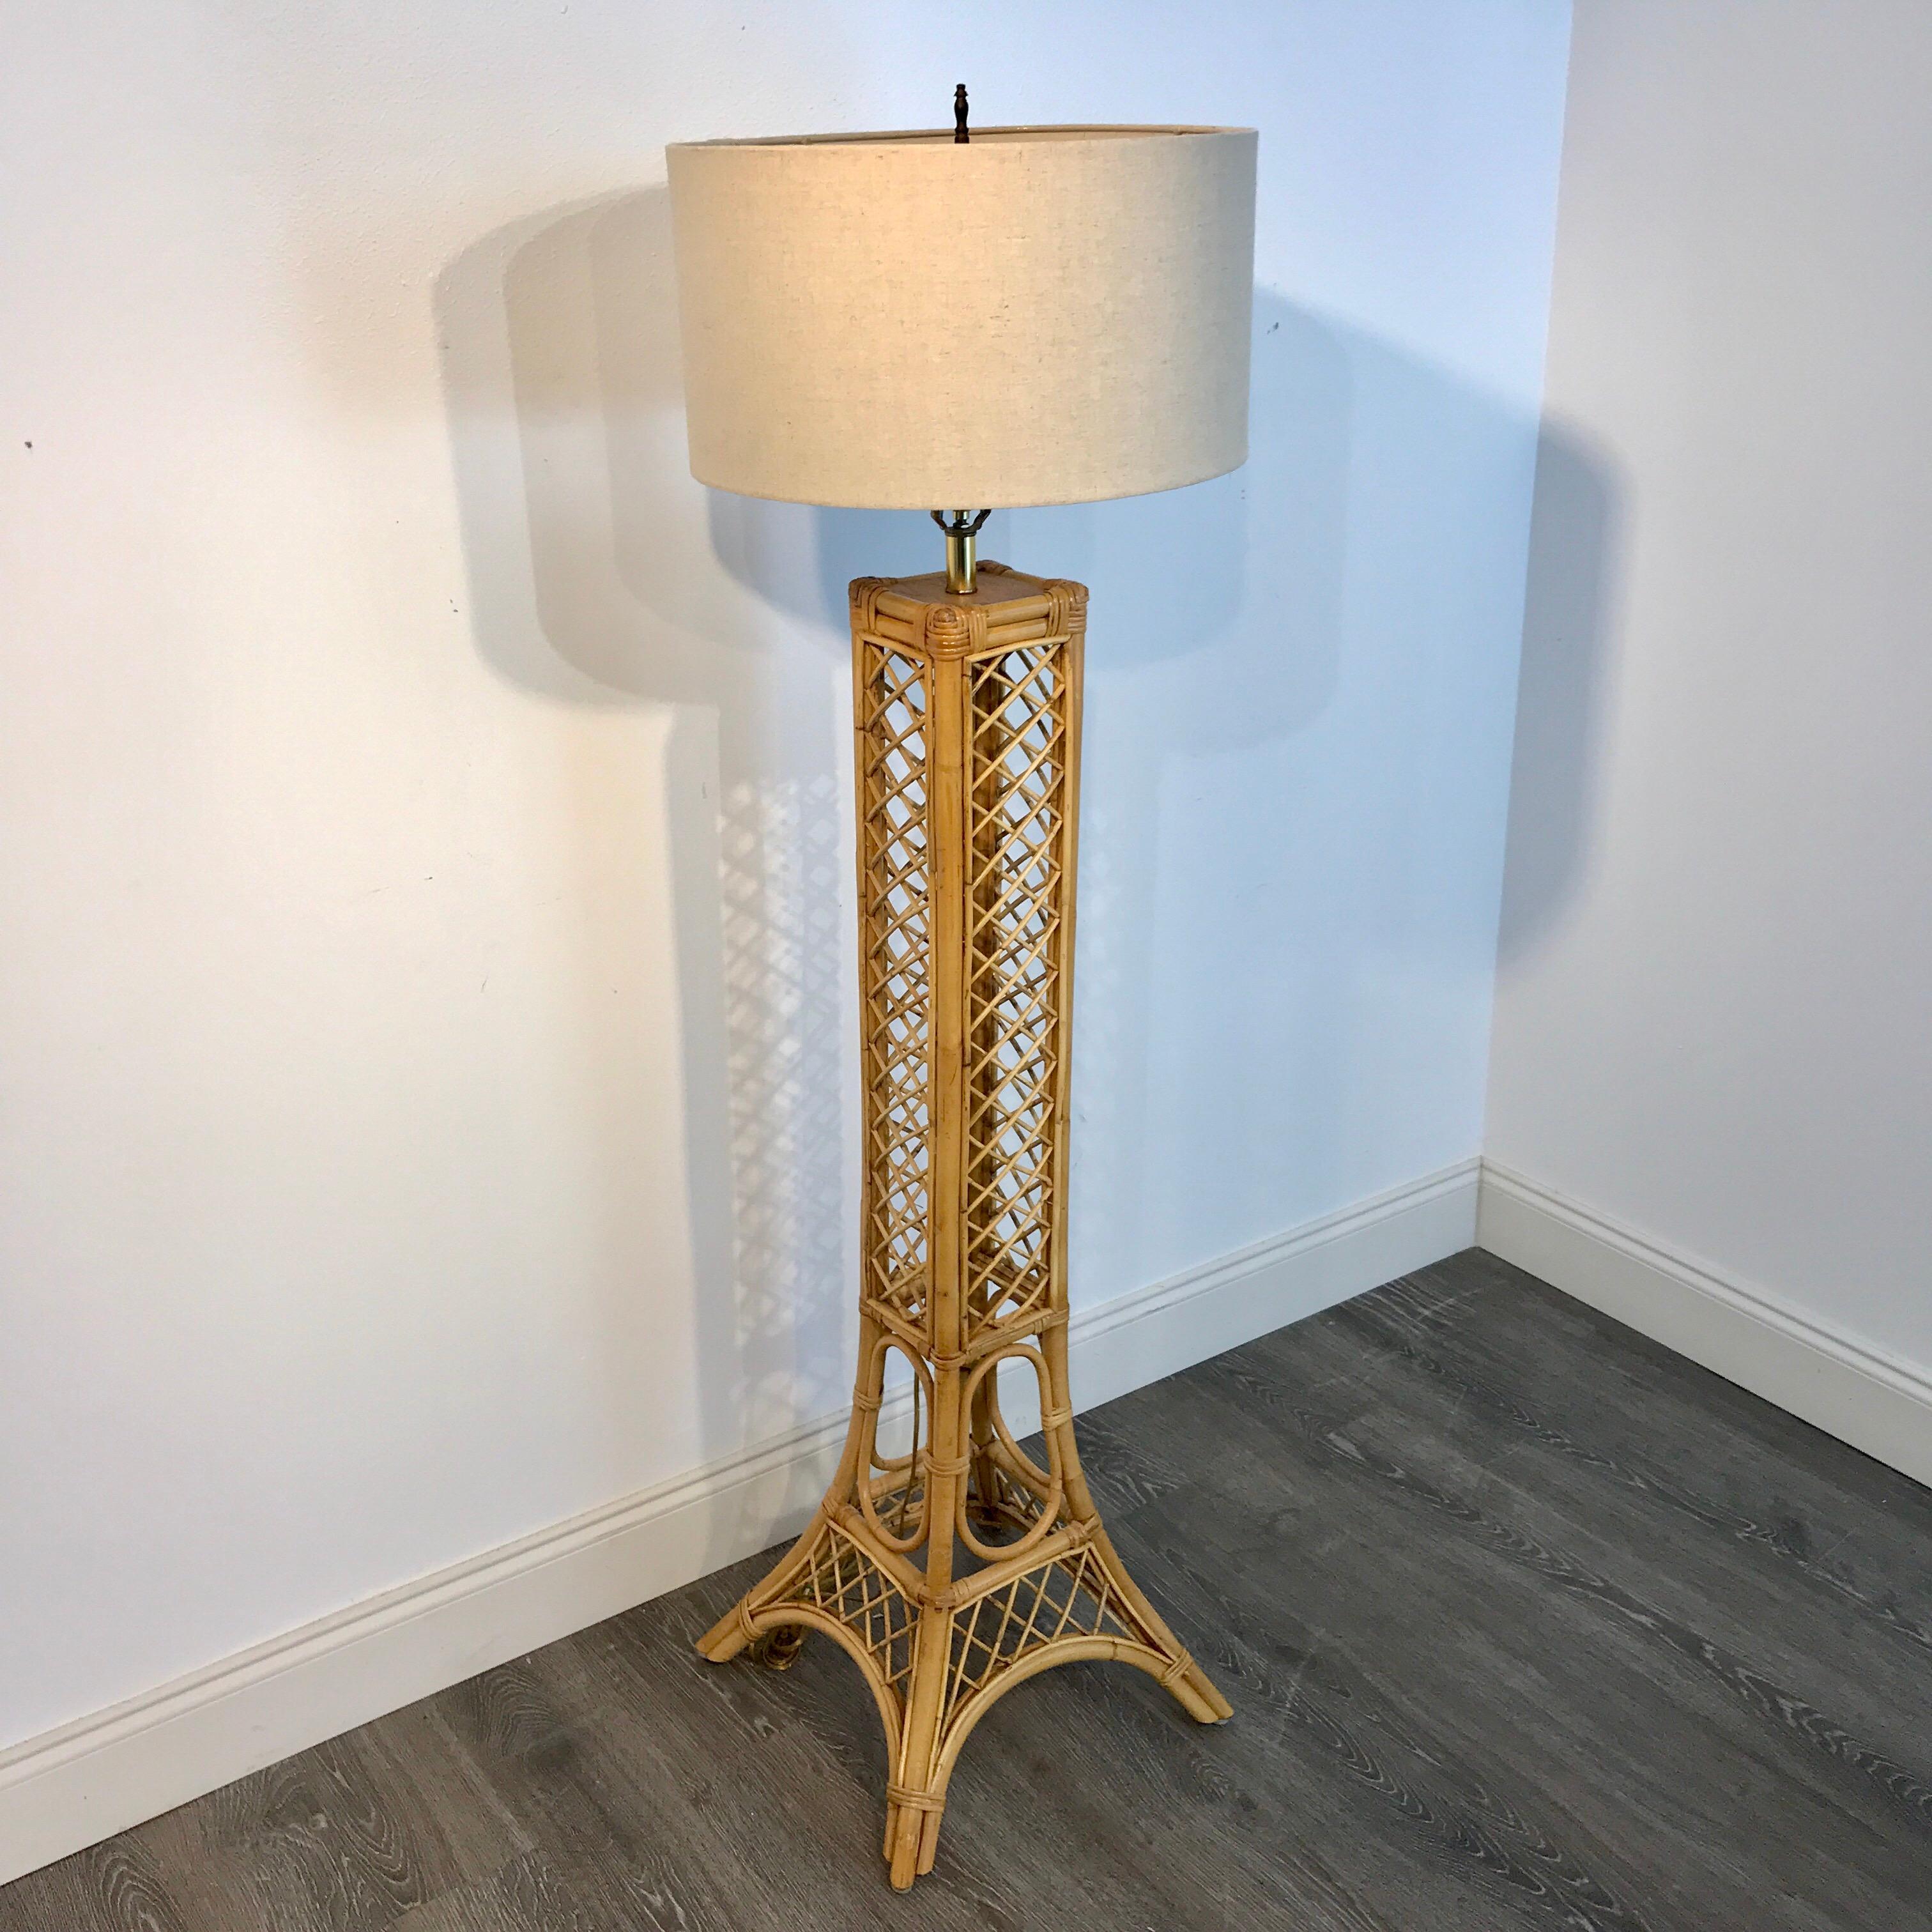 Vintage Eiffel Tower rattan floor lamp, new wiring. Shown with a 10